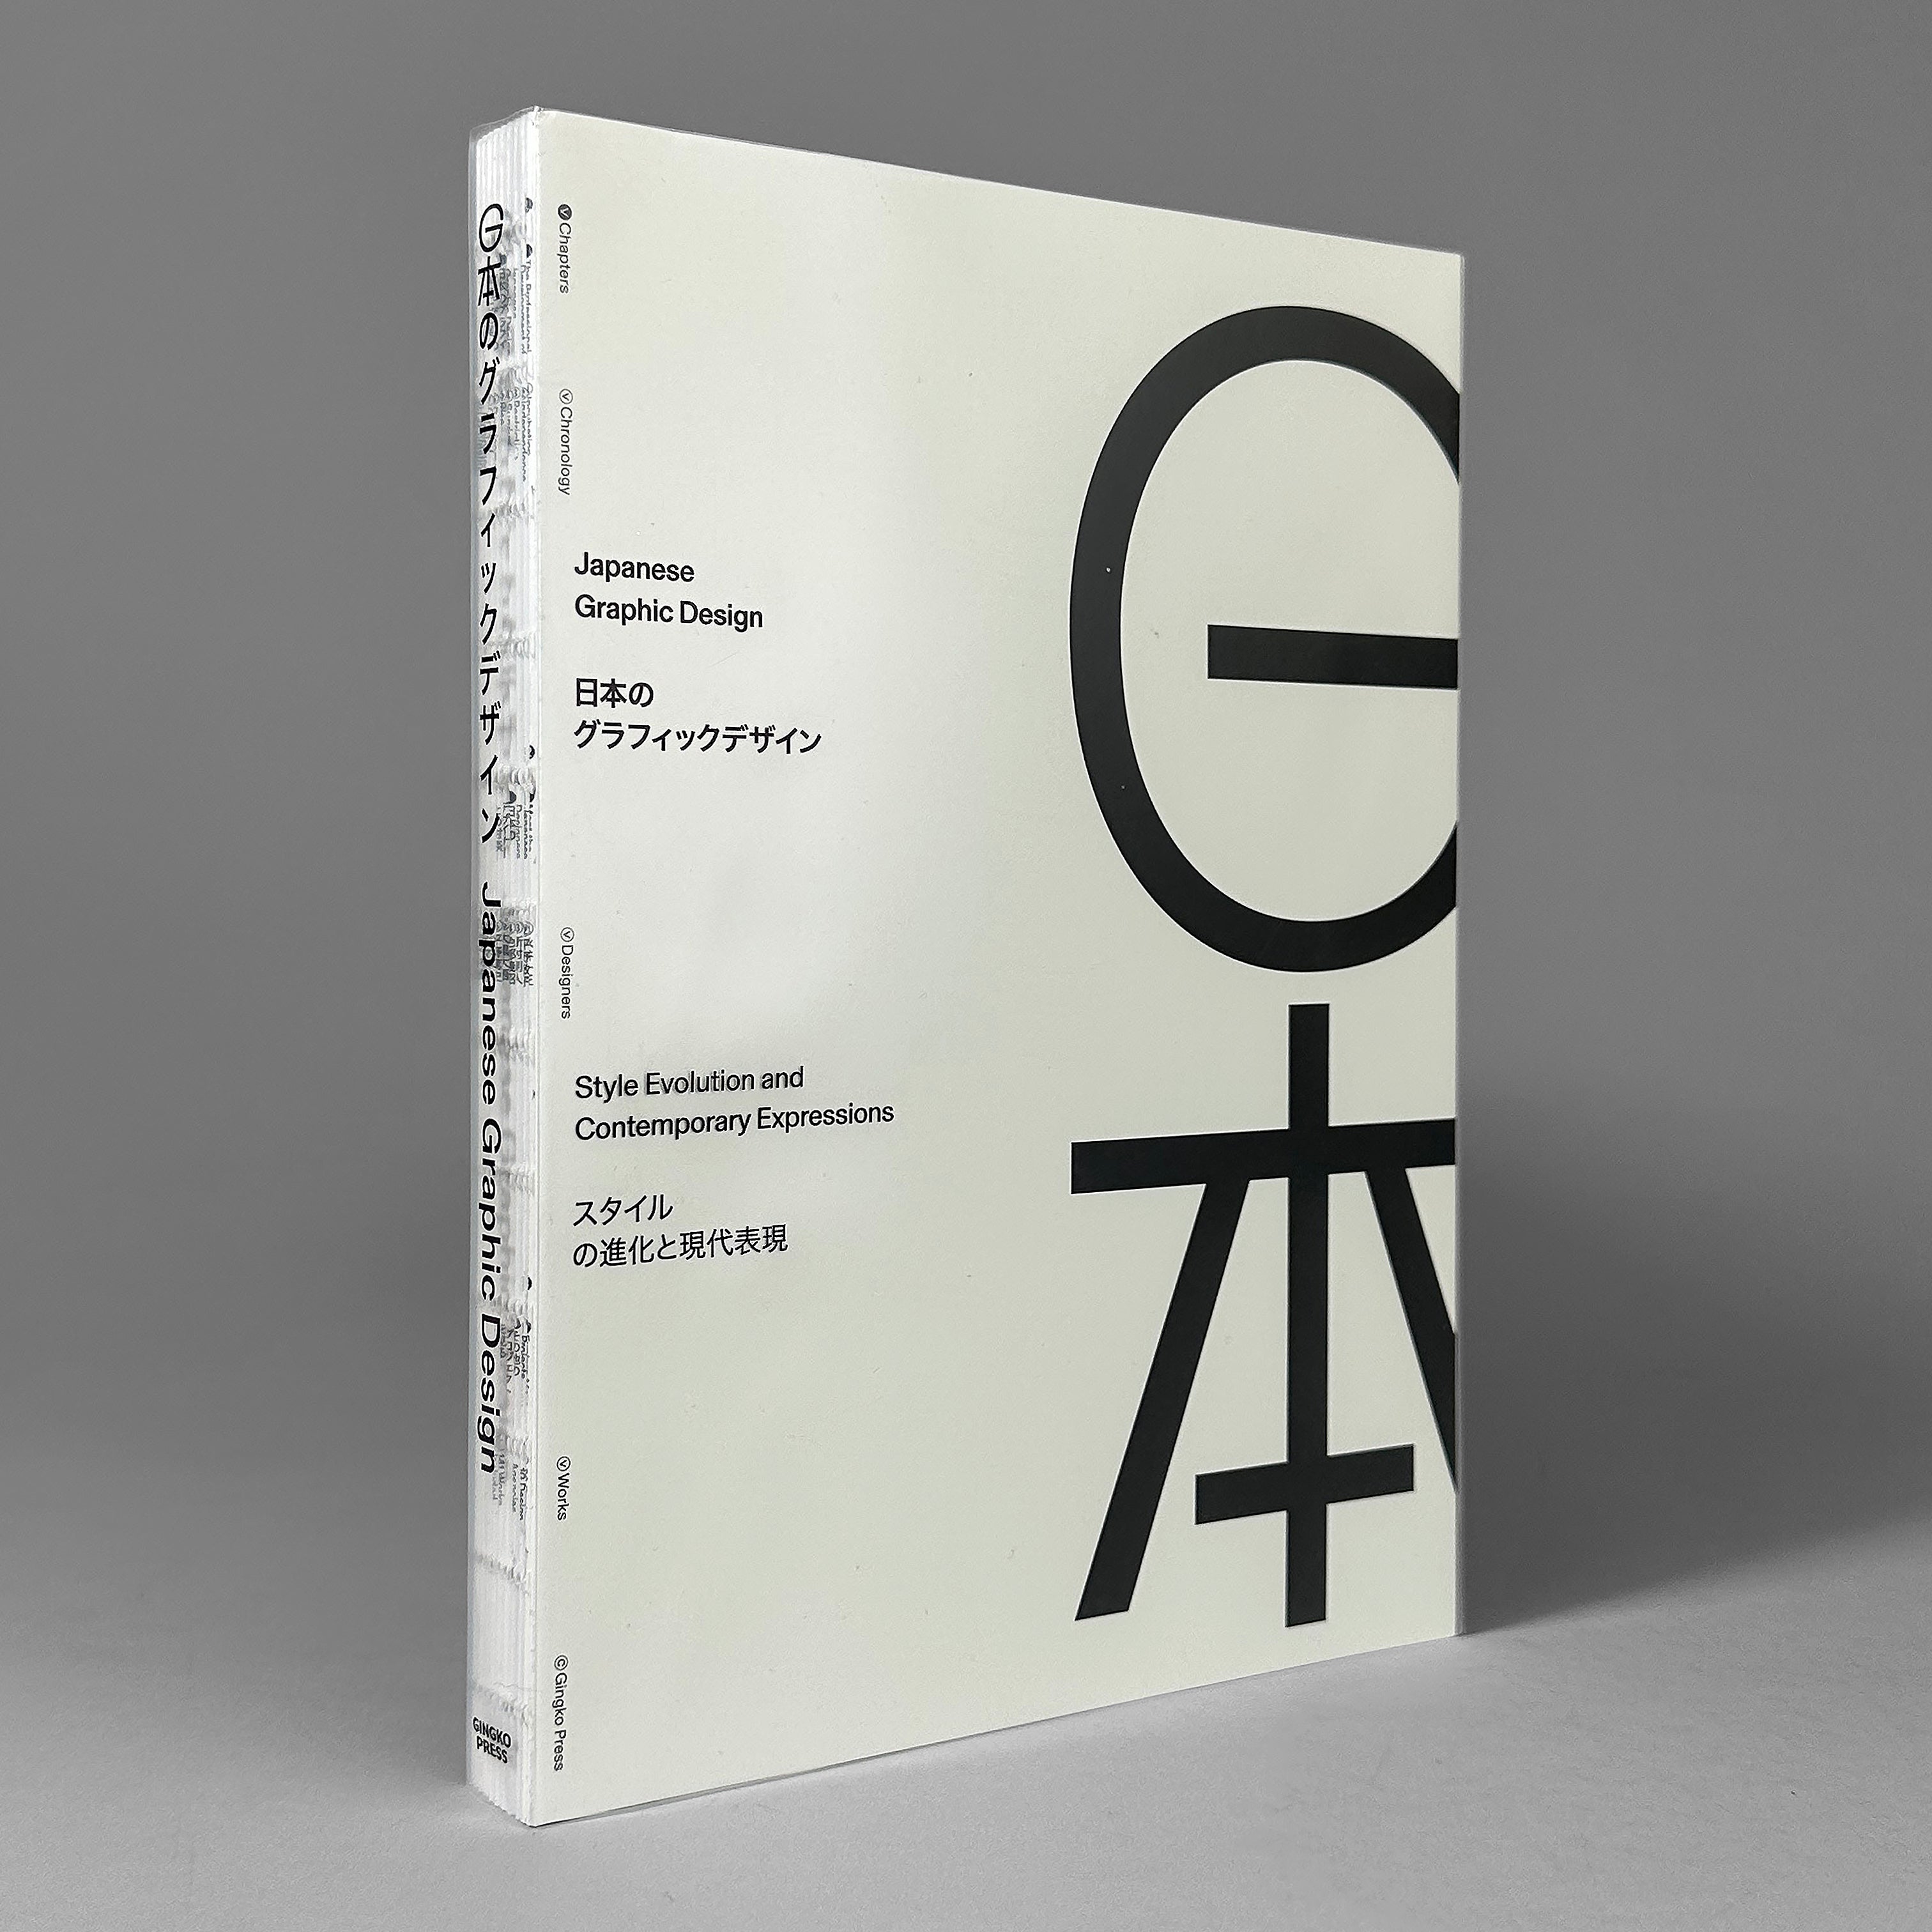 Japanese Graphic Design: Style Evolution and Contemporary